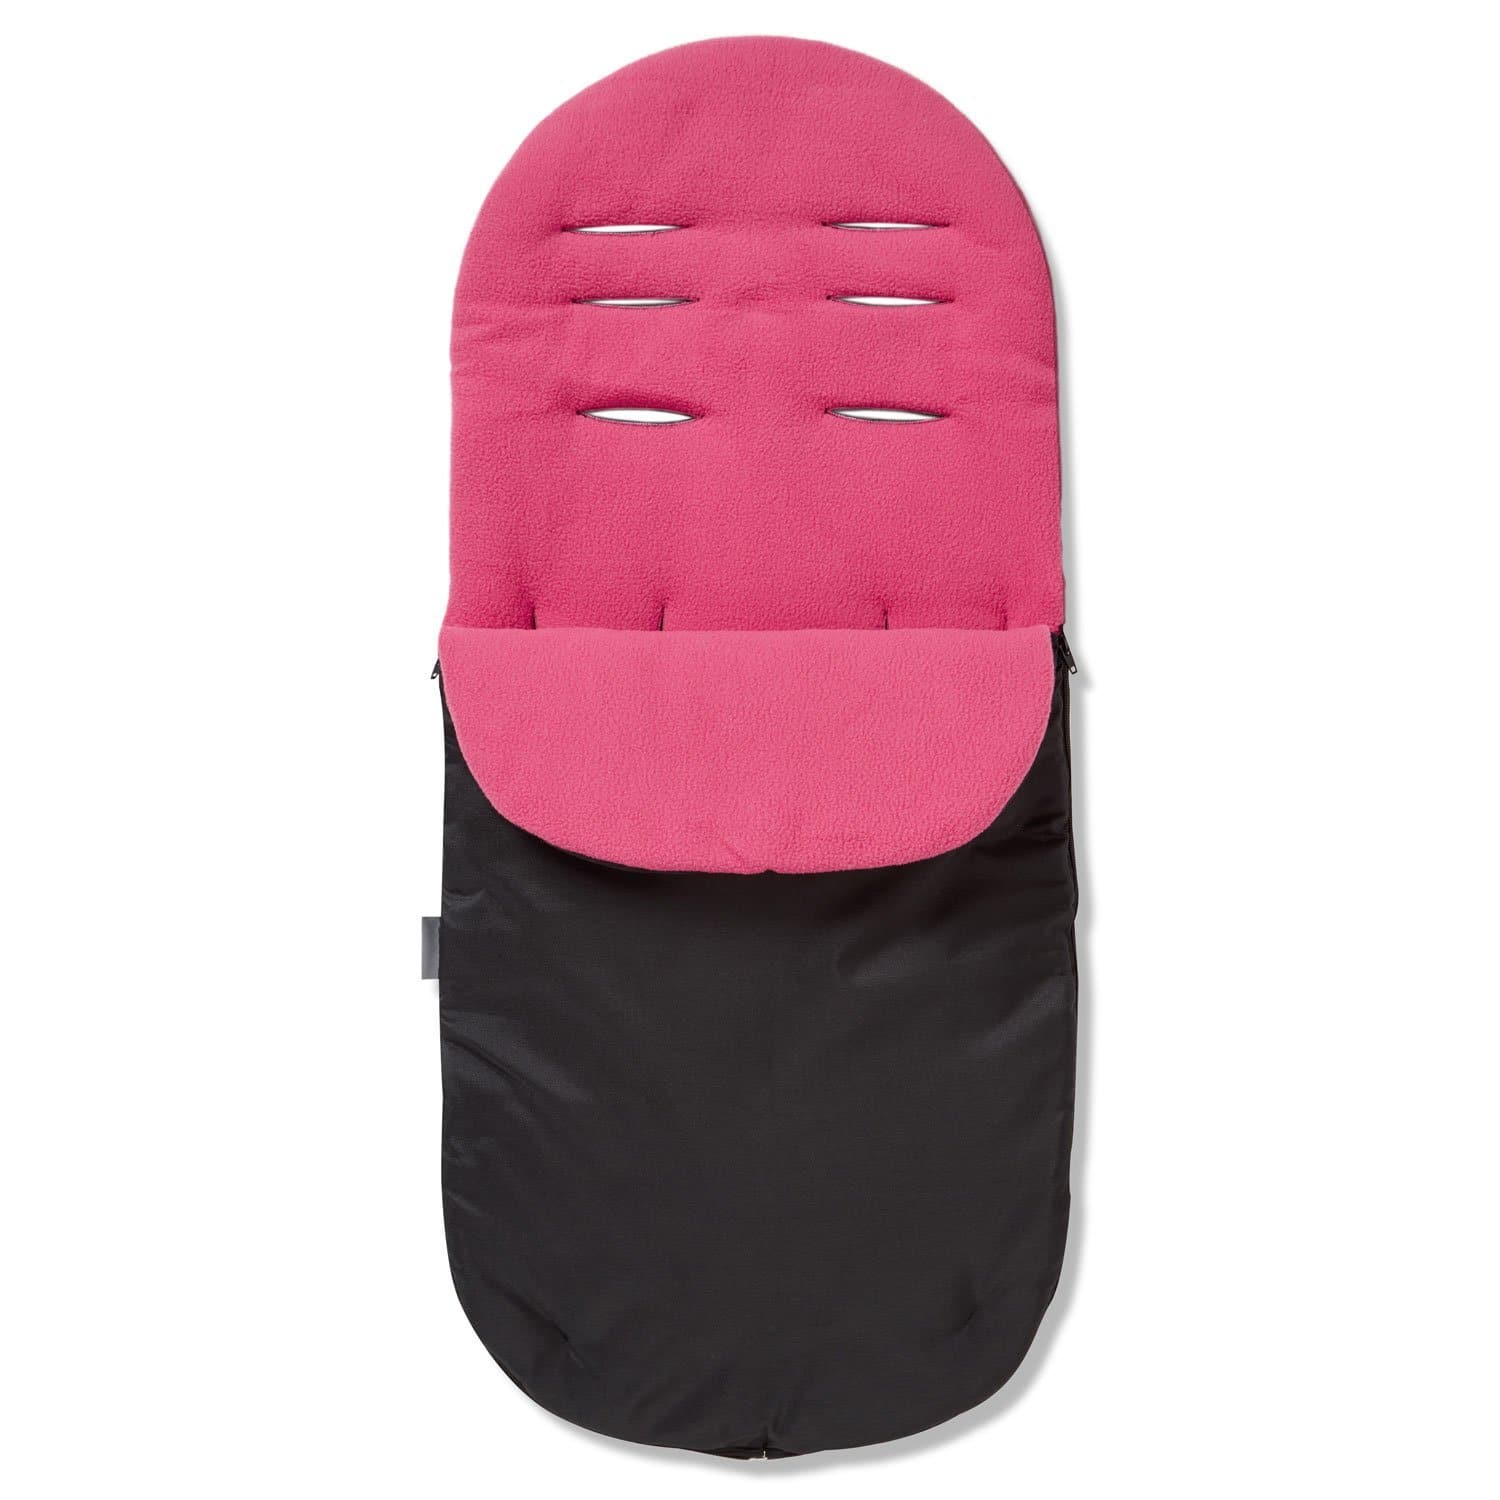 Footmuff / Cosy Toes Compatible with Brevi - Dark Pink / Fits All Models | For Your Little One